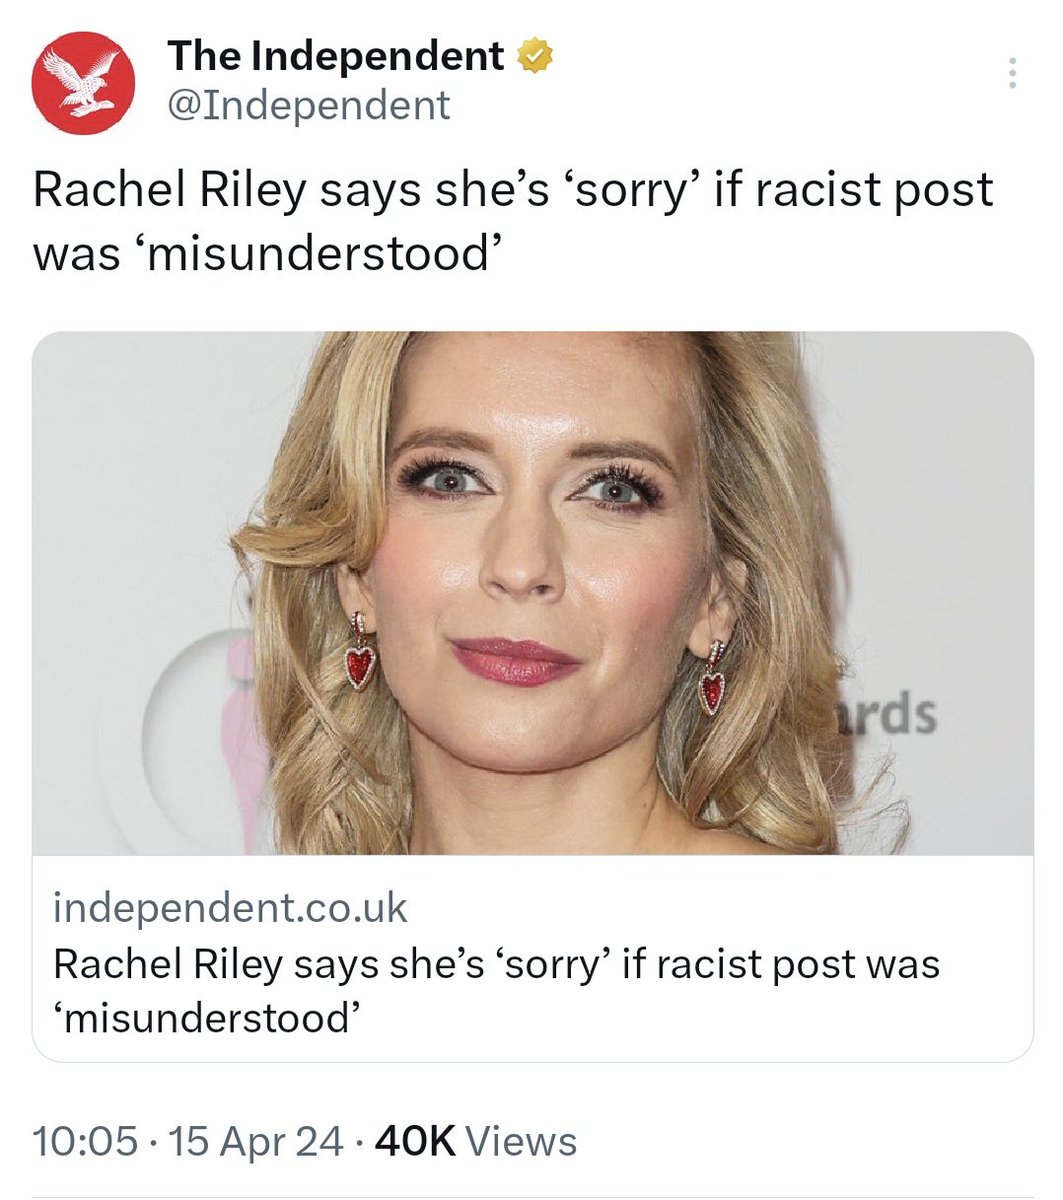 .@RachelRileyRR is 'sorry' people 'misunderstood' her racist post. She is not sorry that she made a racist post in the first place. How people continue to take her seriously is astonishing.